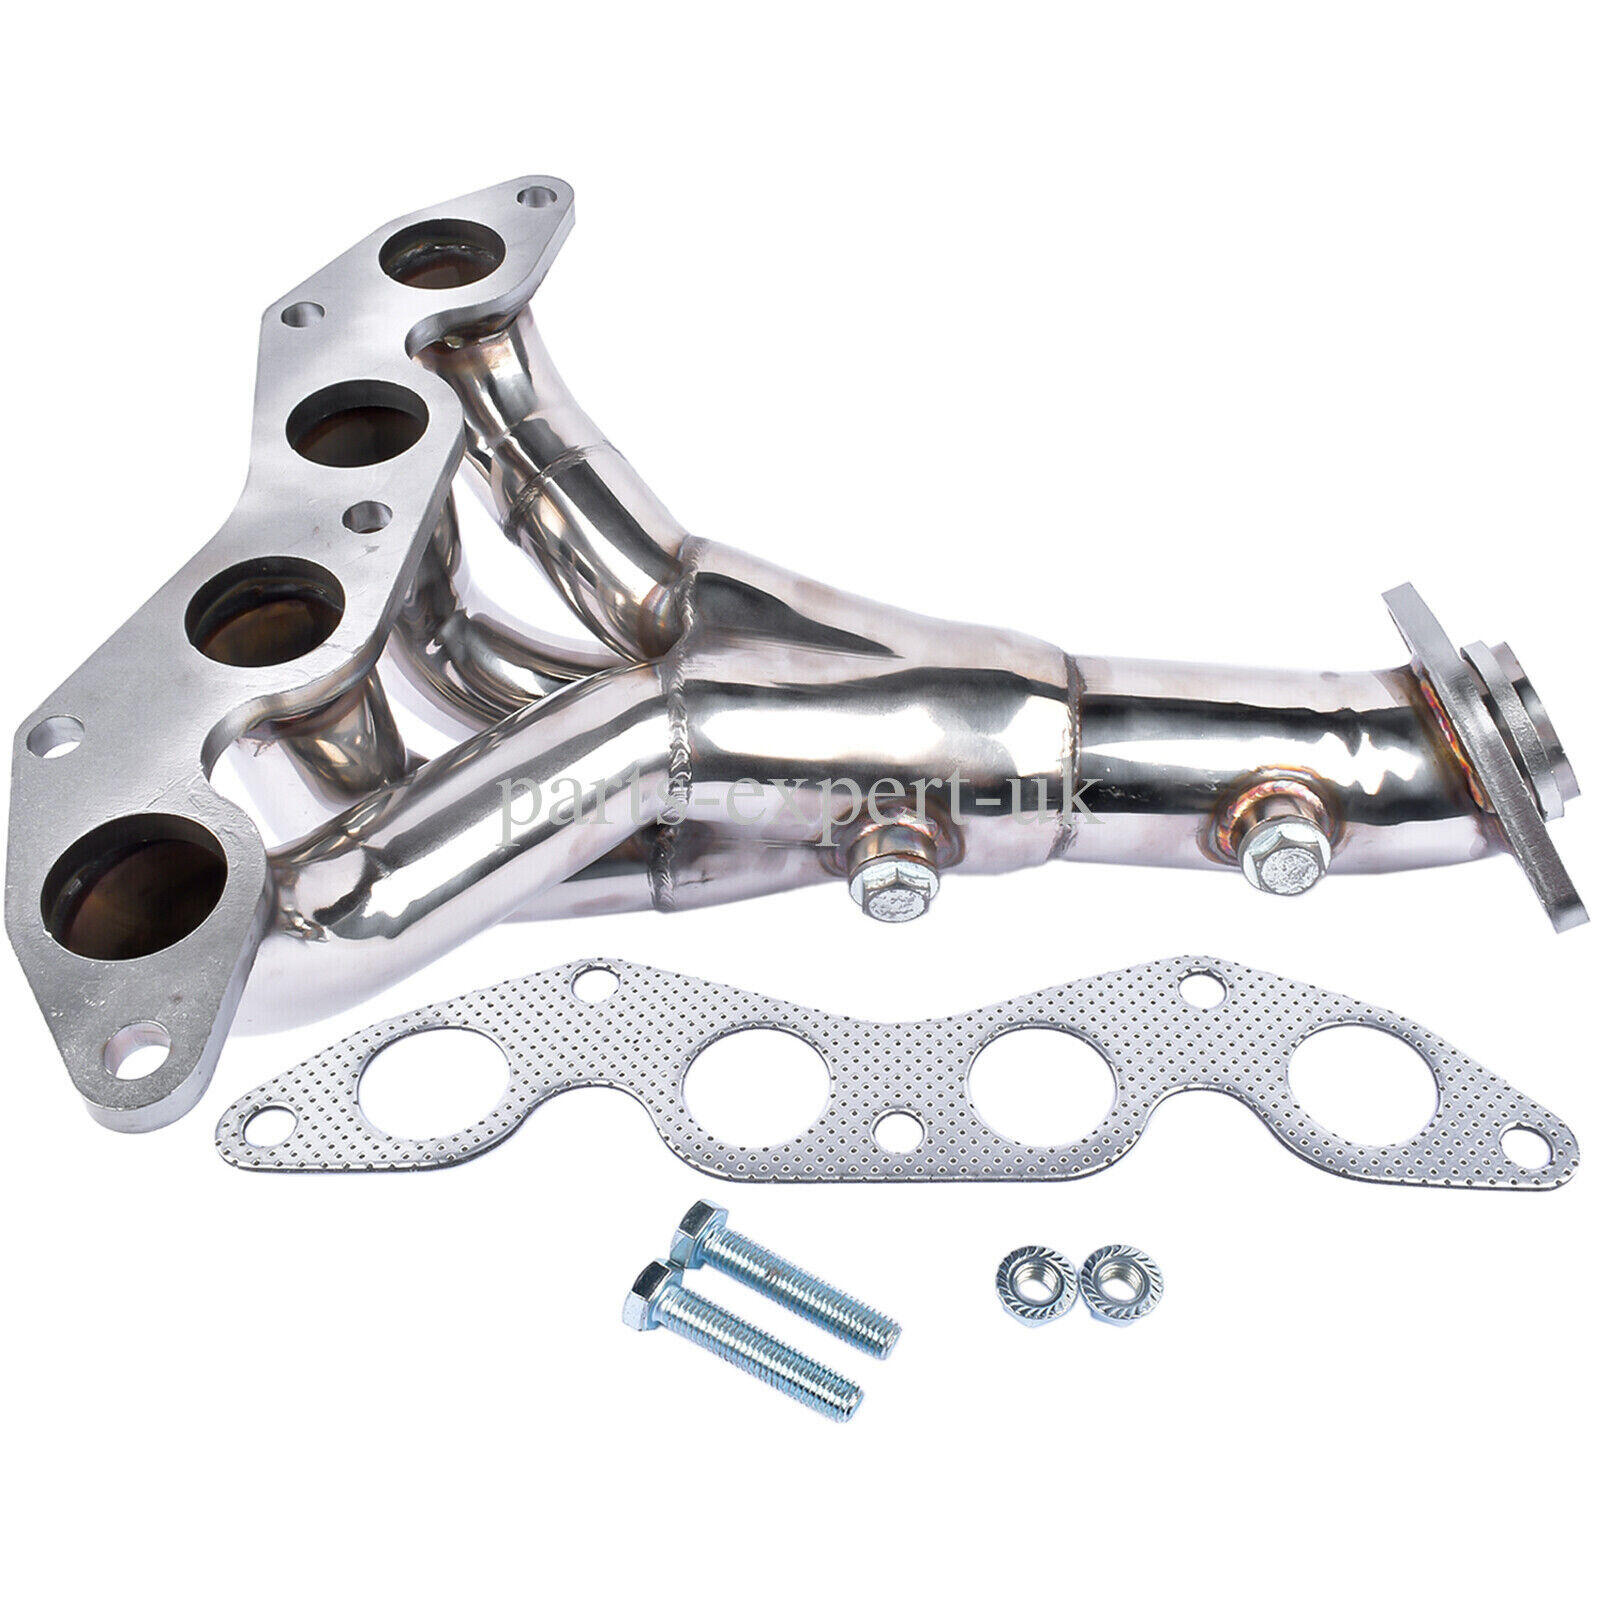 Exhaust Manifold Header Stainless for Honda Civic Dx/Lx 2001-2005 NEW